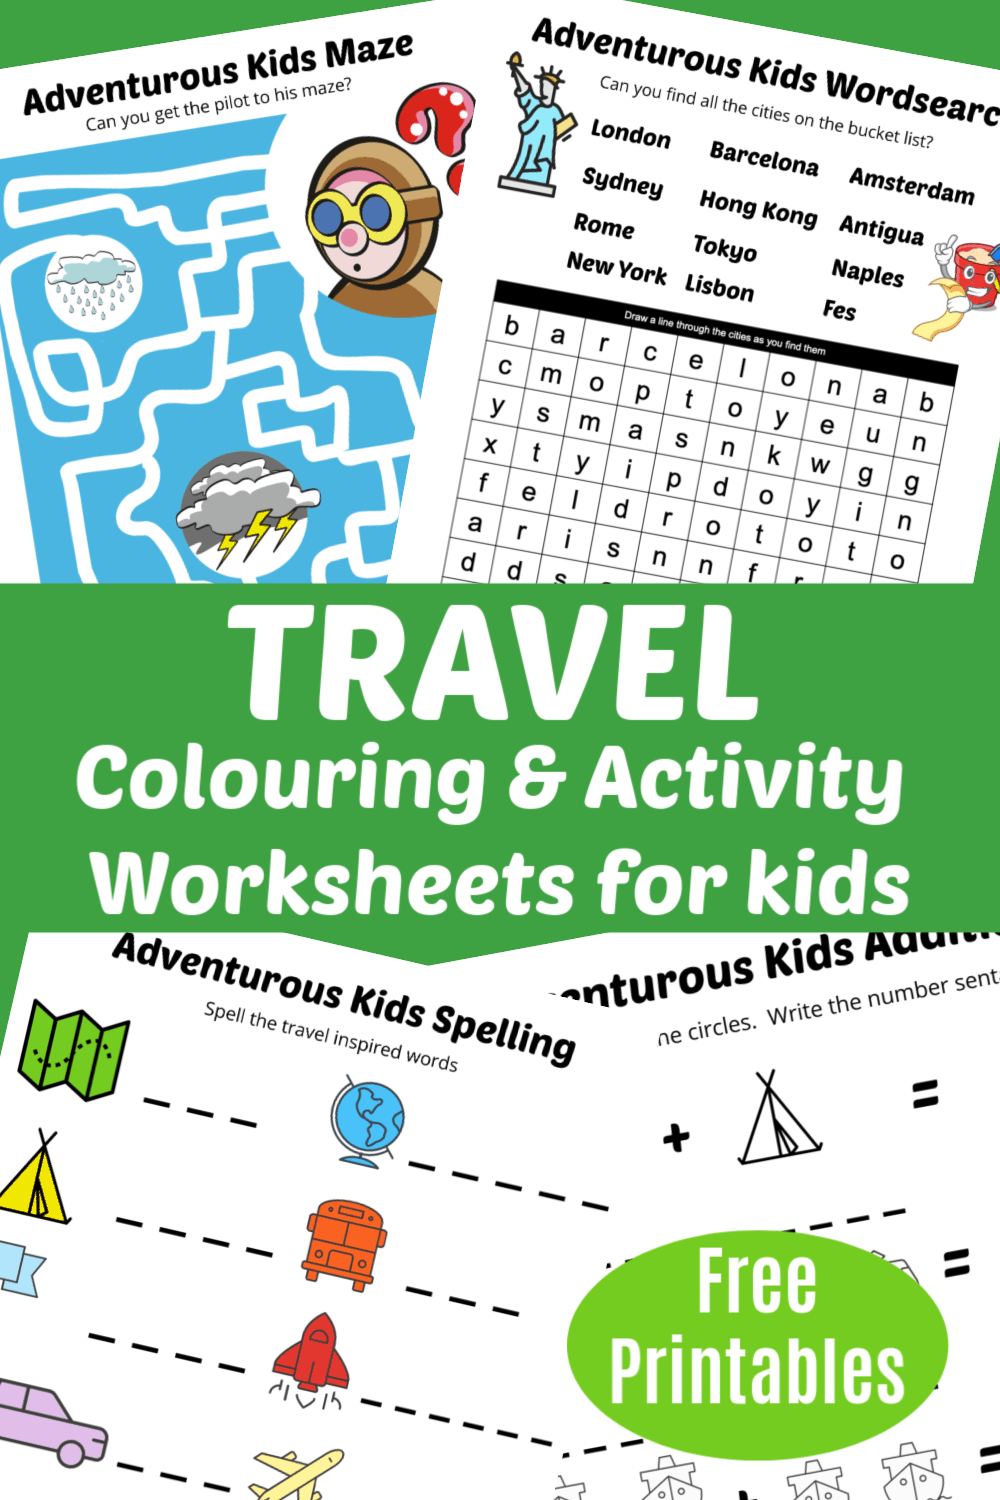 Free Travel Themed Kids Colouring & Activity Pages - Free Printable Downloads. Pin to your kids activity board now